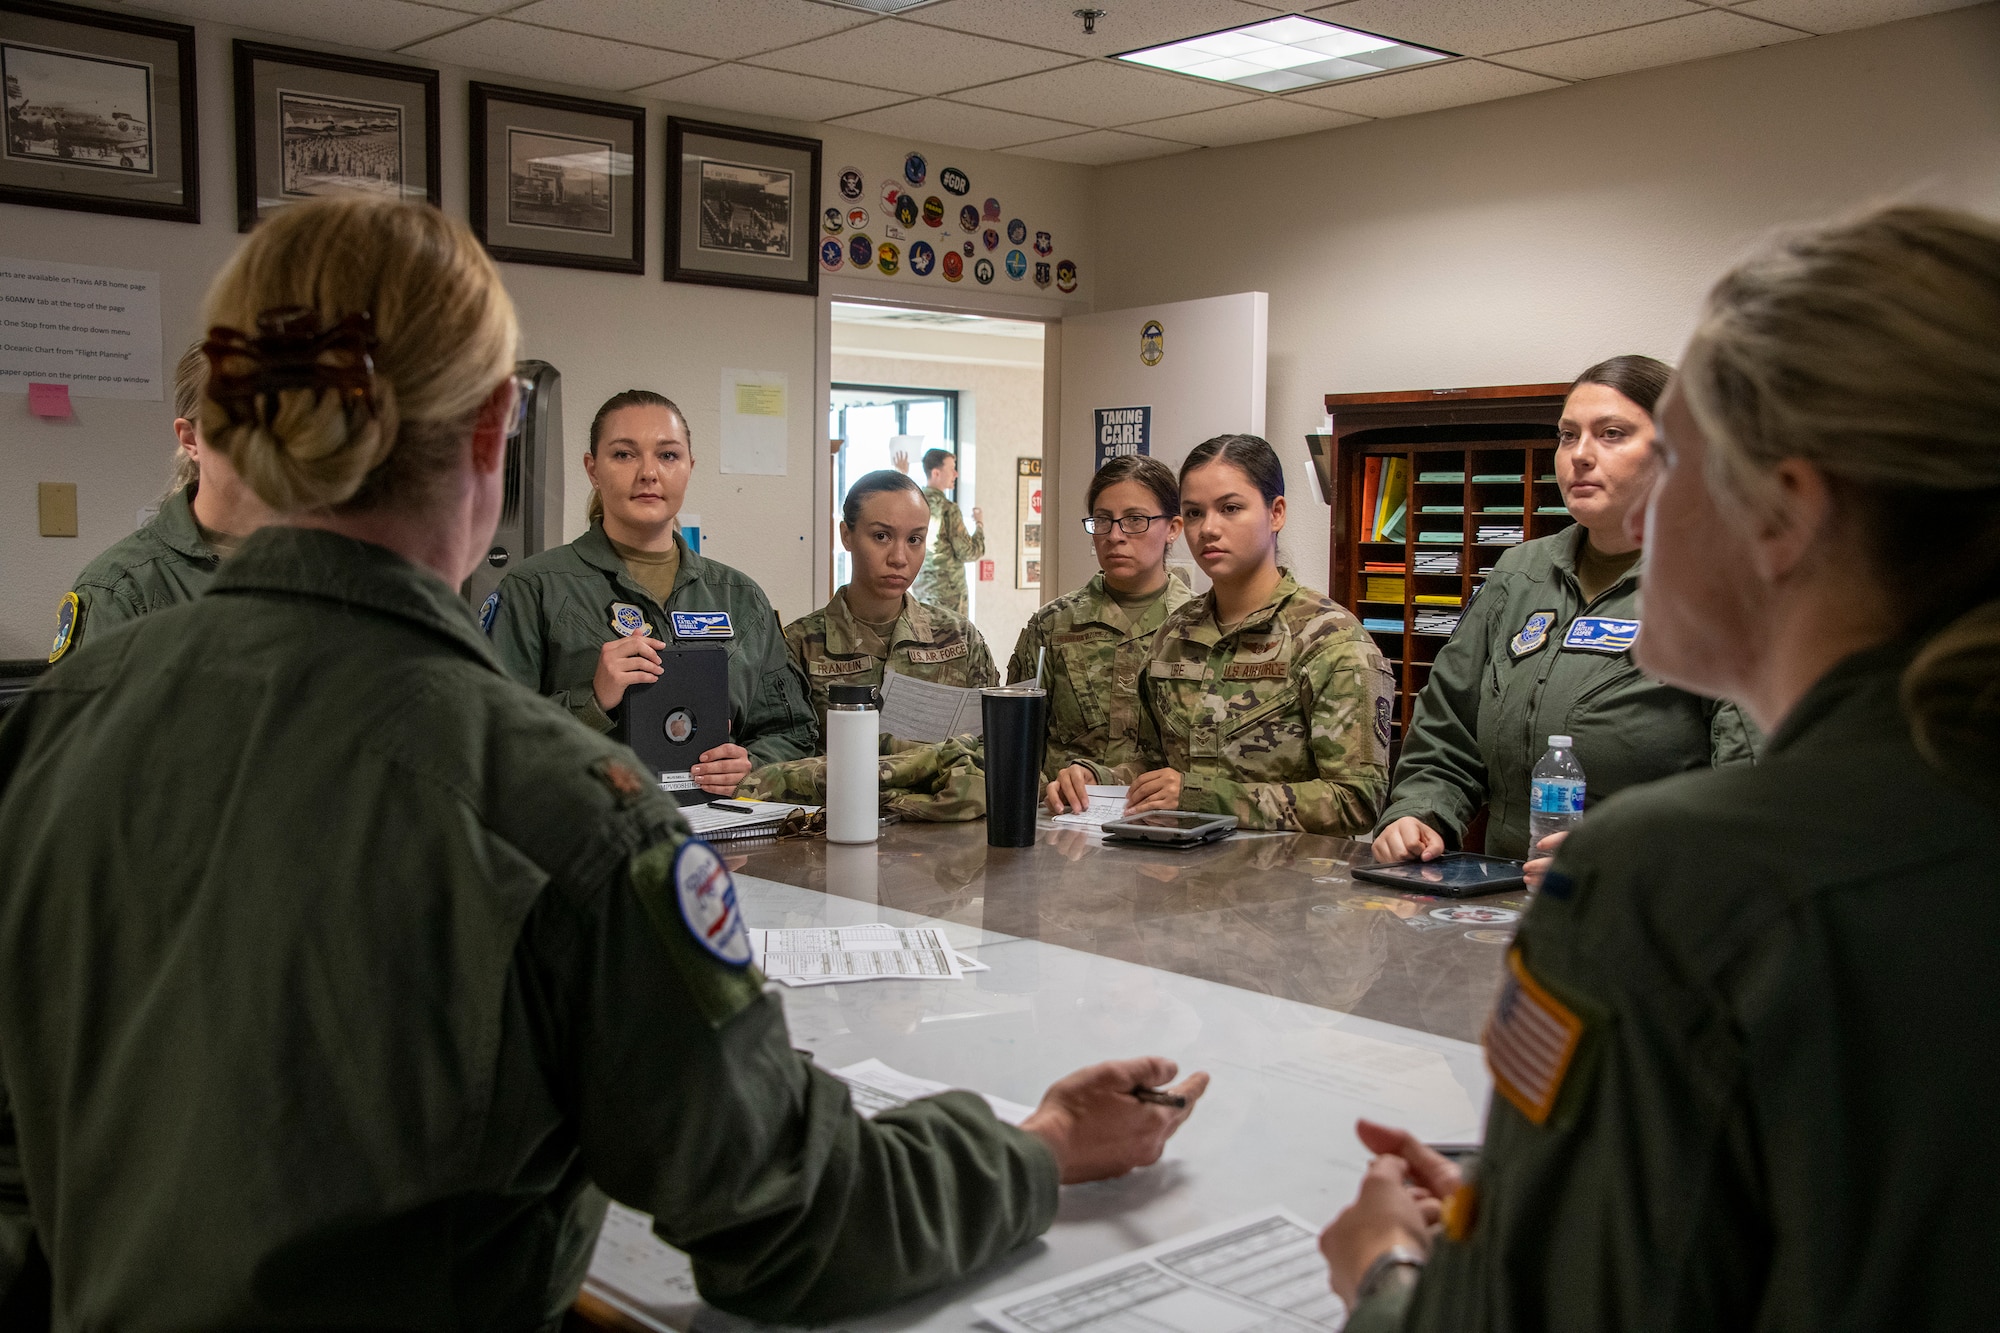 U.S. Air Force aircrew attend a pre-flight briefing at Travis Air Force Base, California, March 22, 2022. In honor of Women's History Month, an all-female KC-10 flight crew from the 60th and 349th Air Mobility Wings flew on an aerial refueling training mission over California and Oregon. (U.S. Air Force photo by Heide Couch)